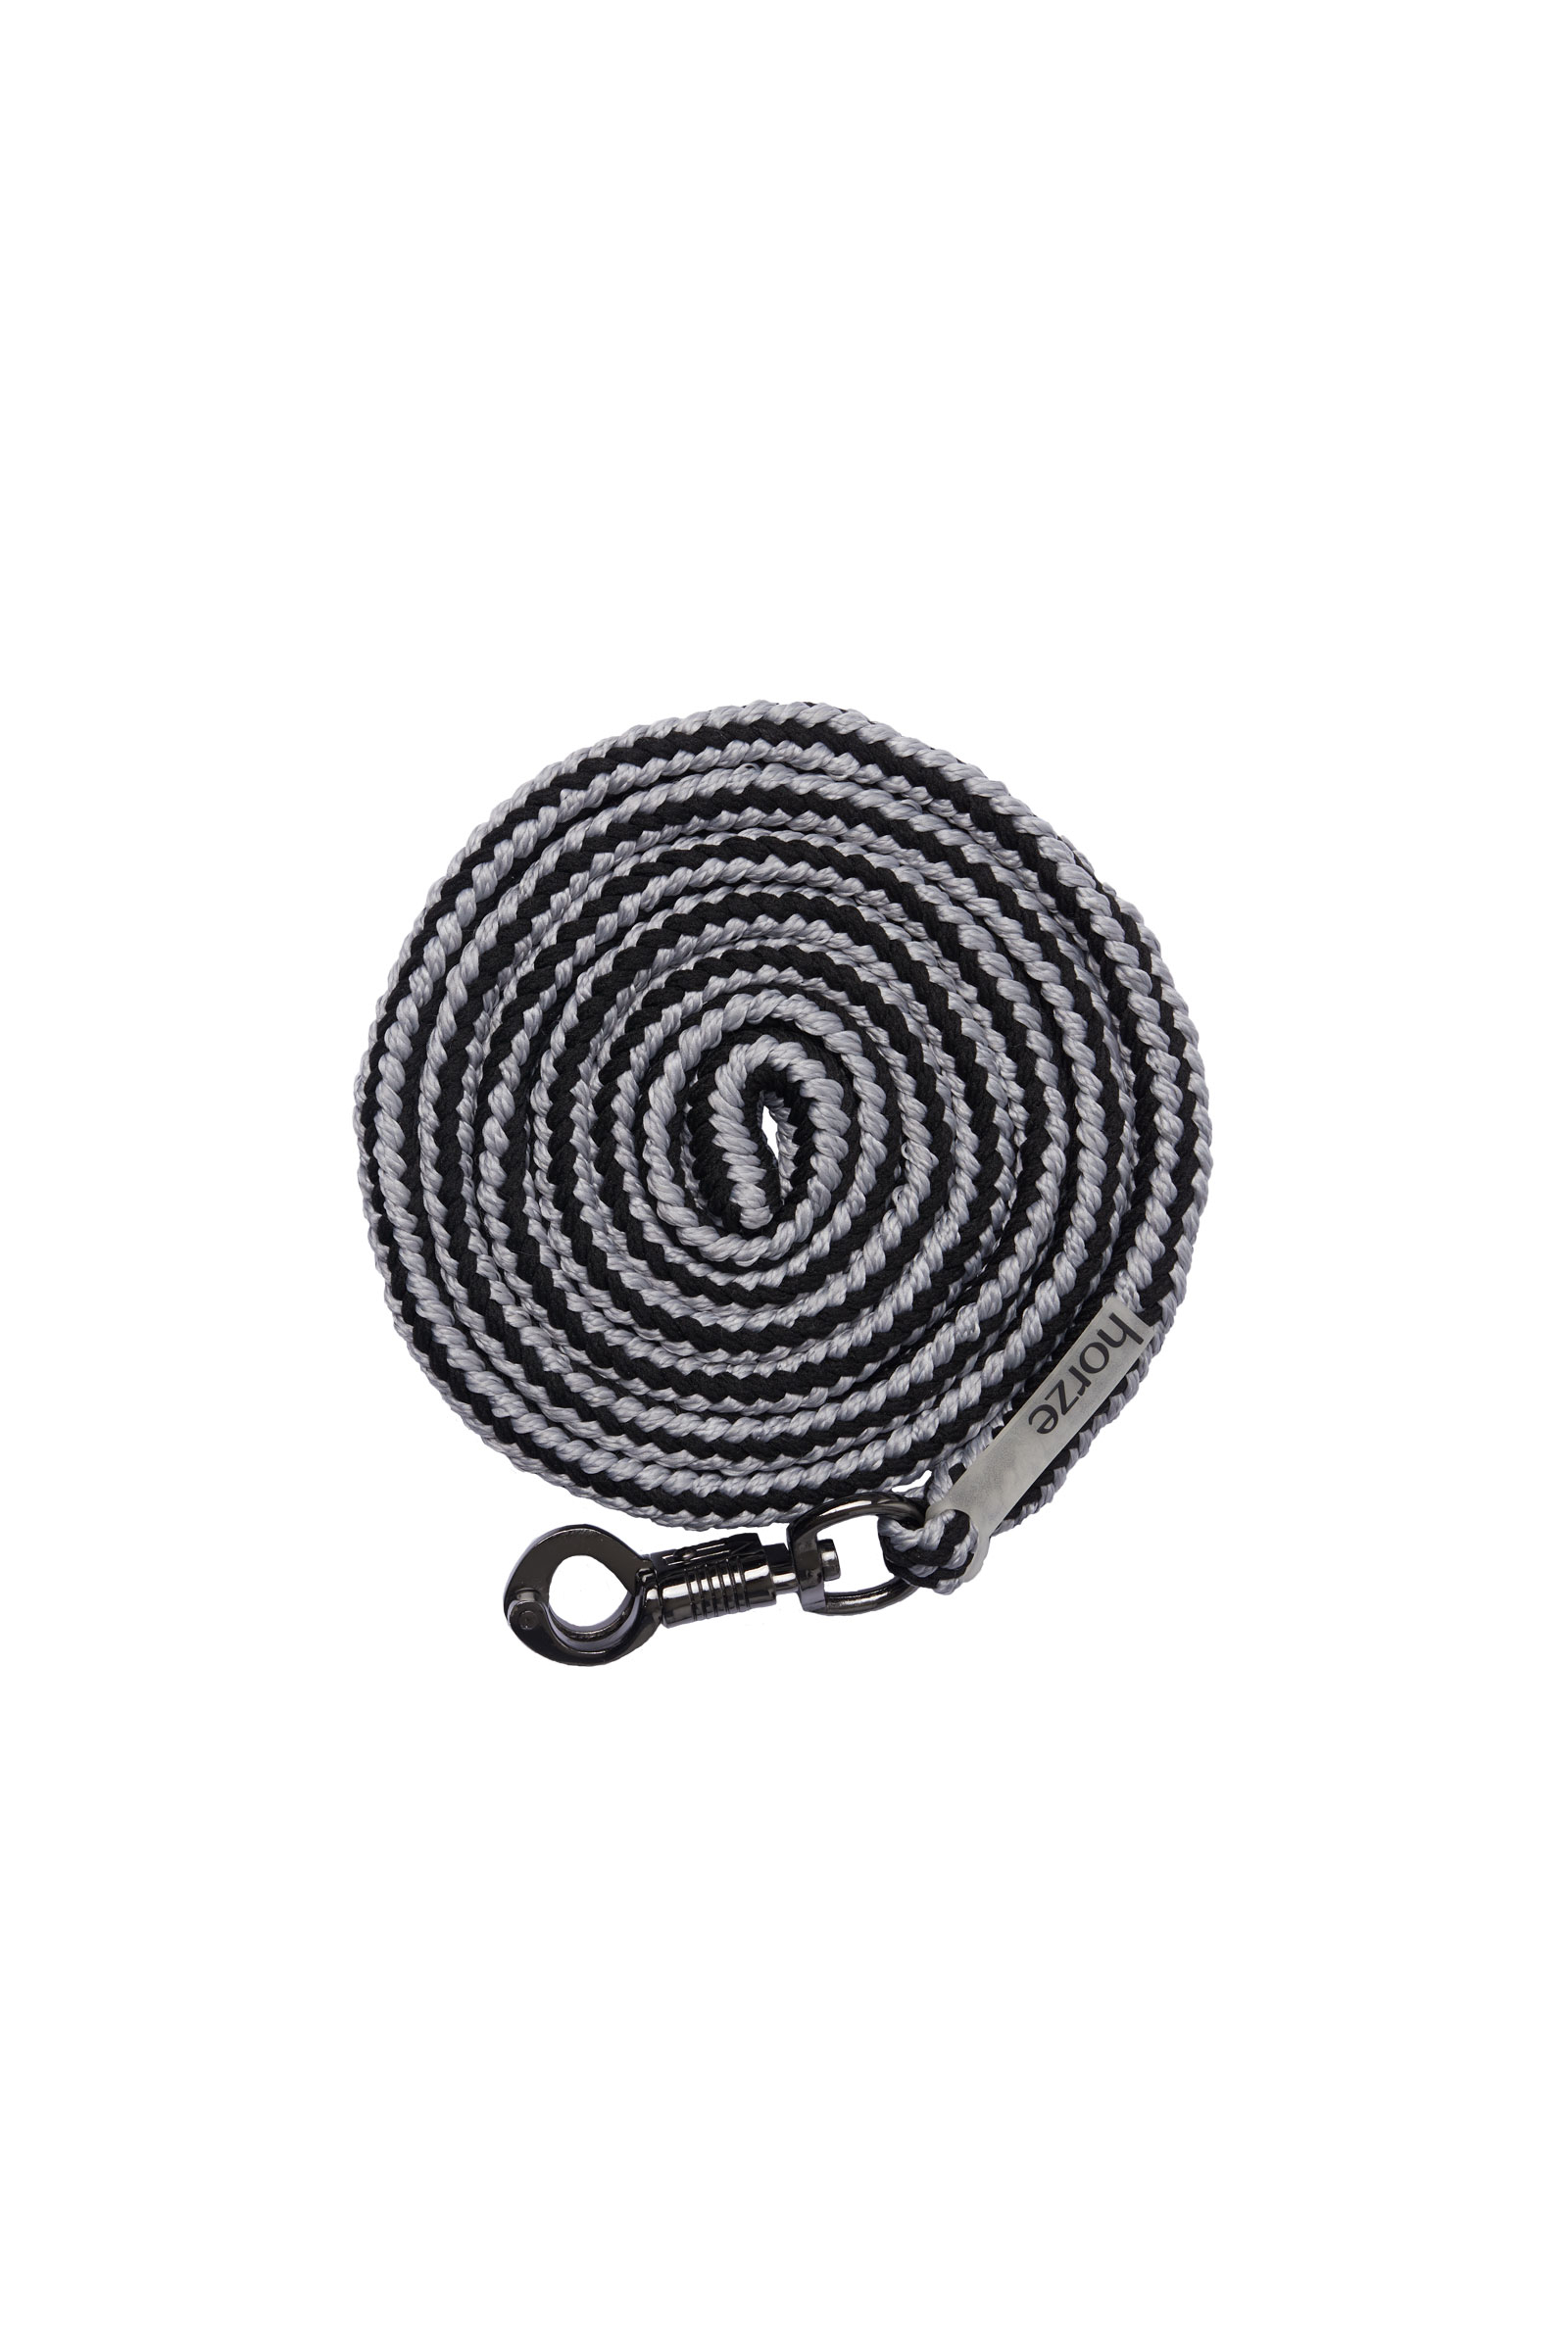 Lead Ropes for Horses